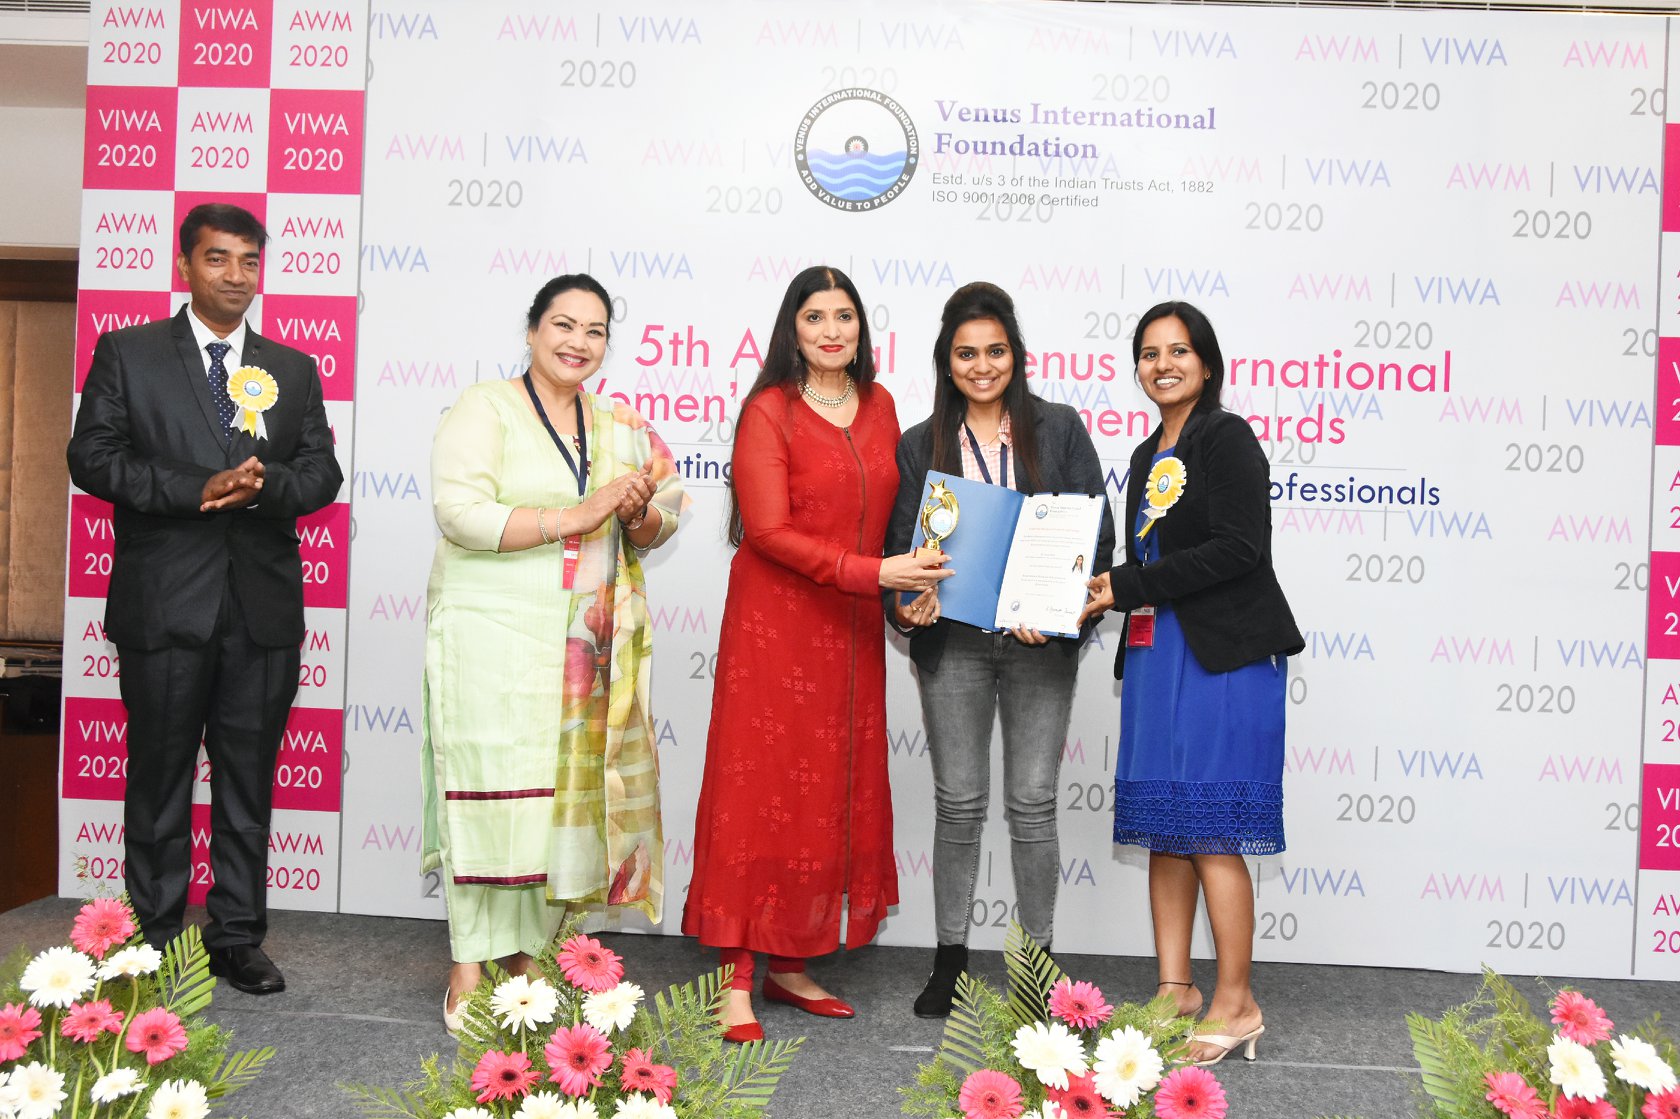 Dr. Sweni shah awarded as a young woman achiever award